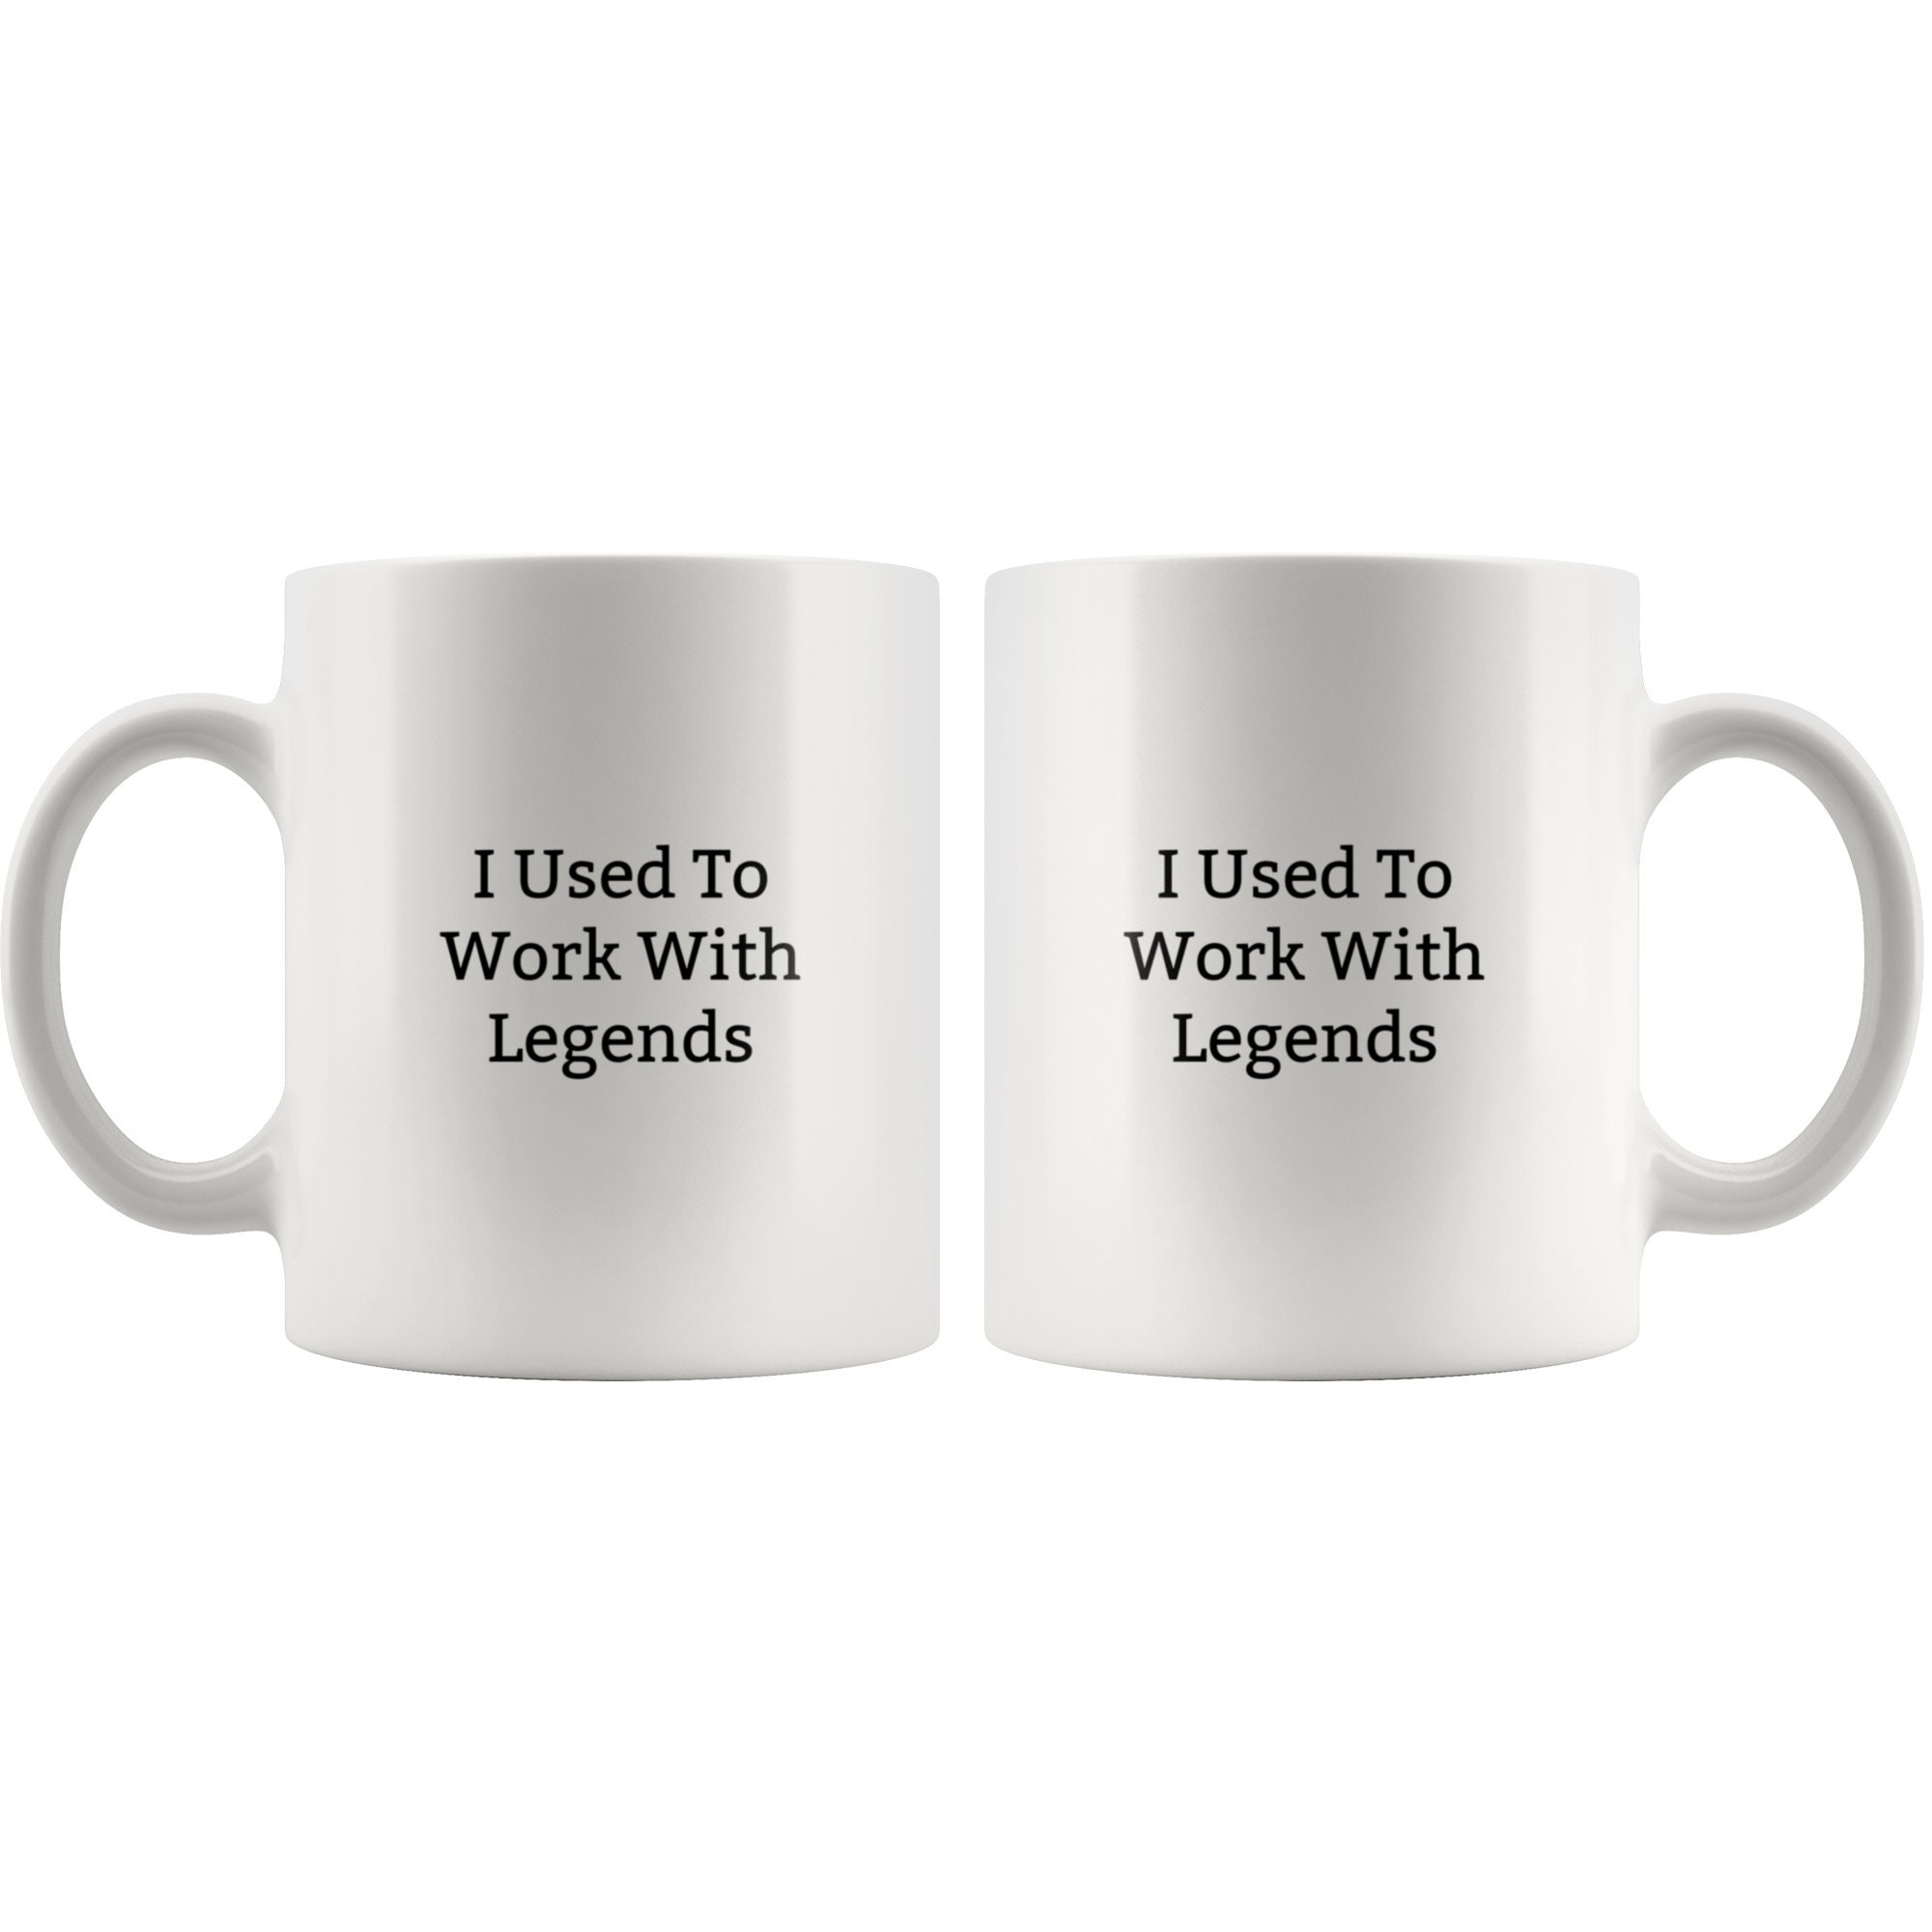 I Used to Work With Legends Mug-gifts Ideas for New Job-new - Etsy